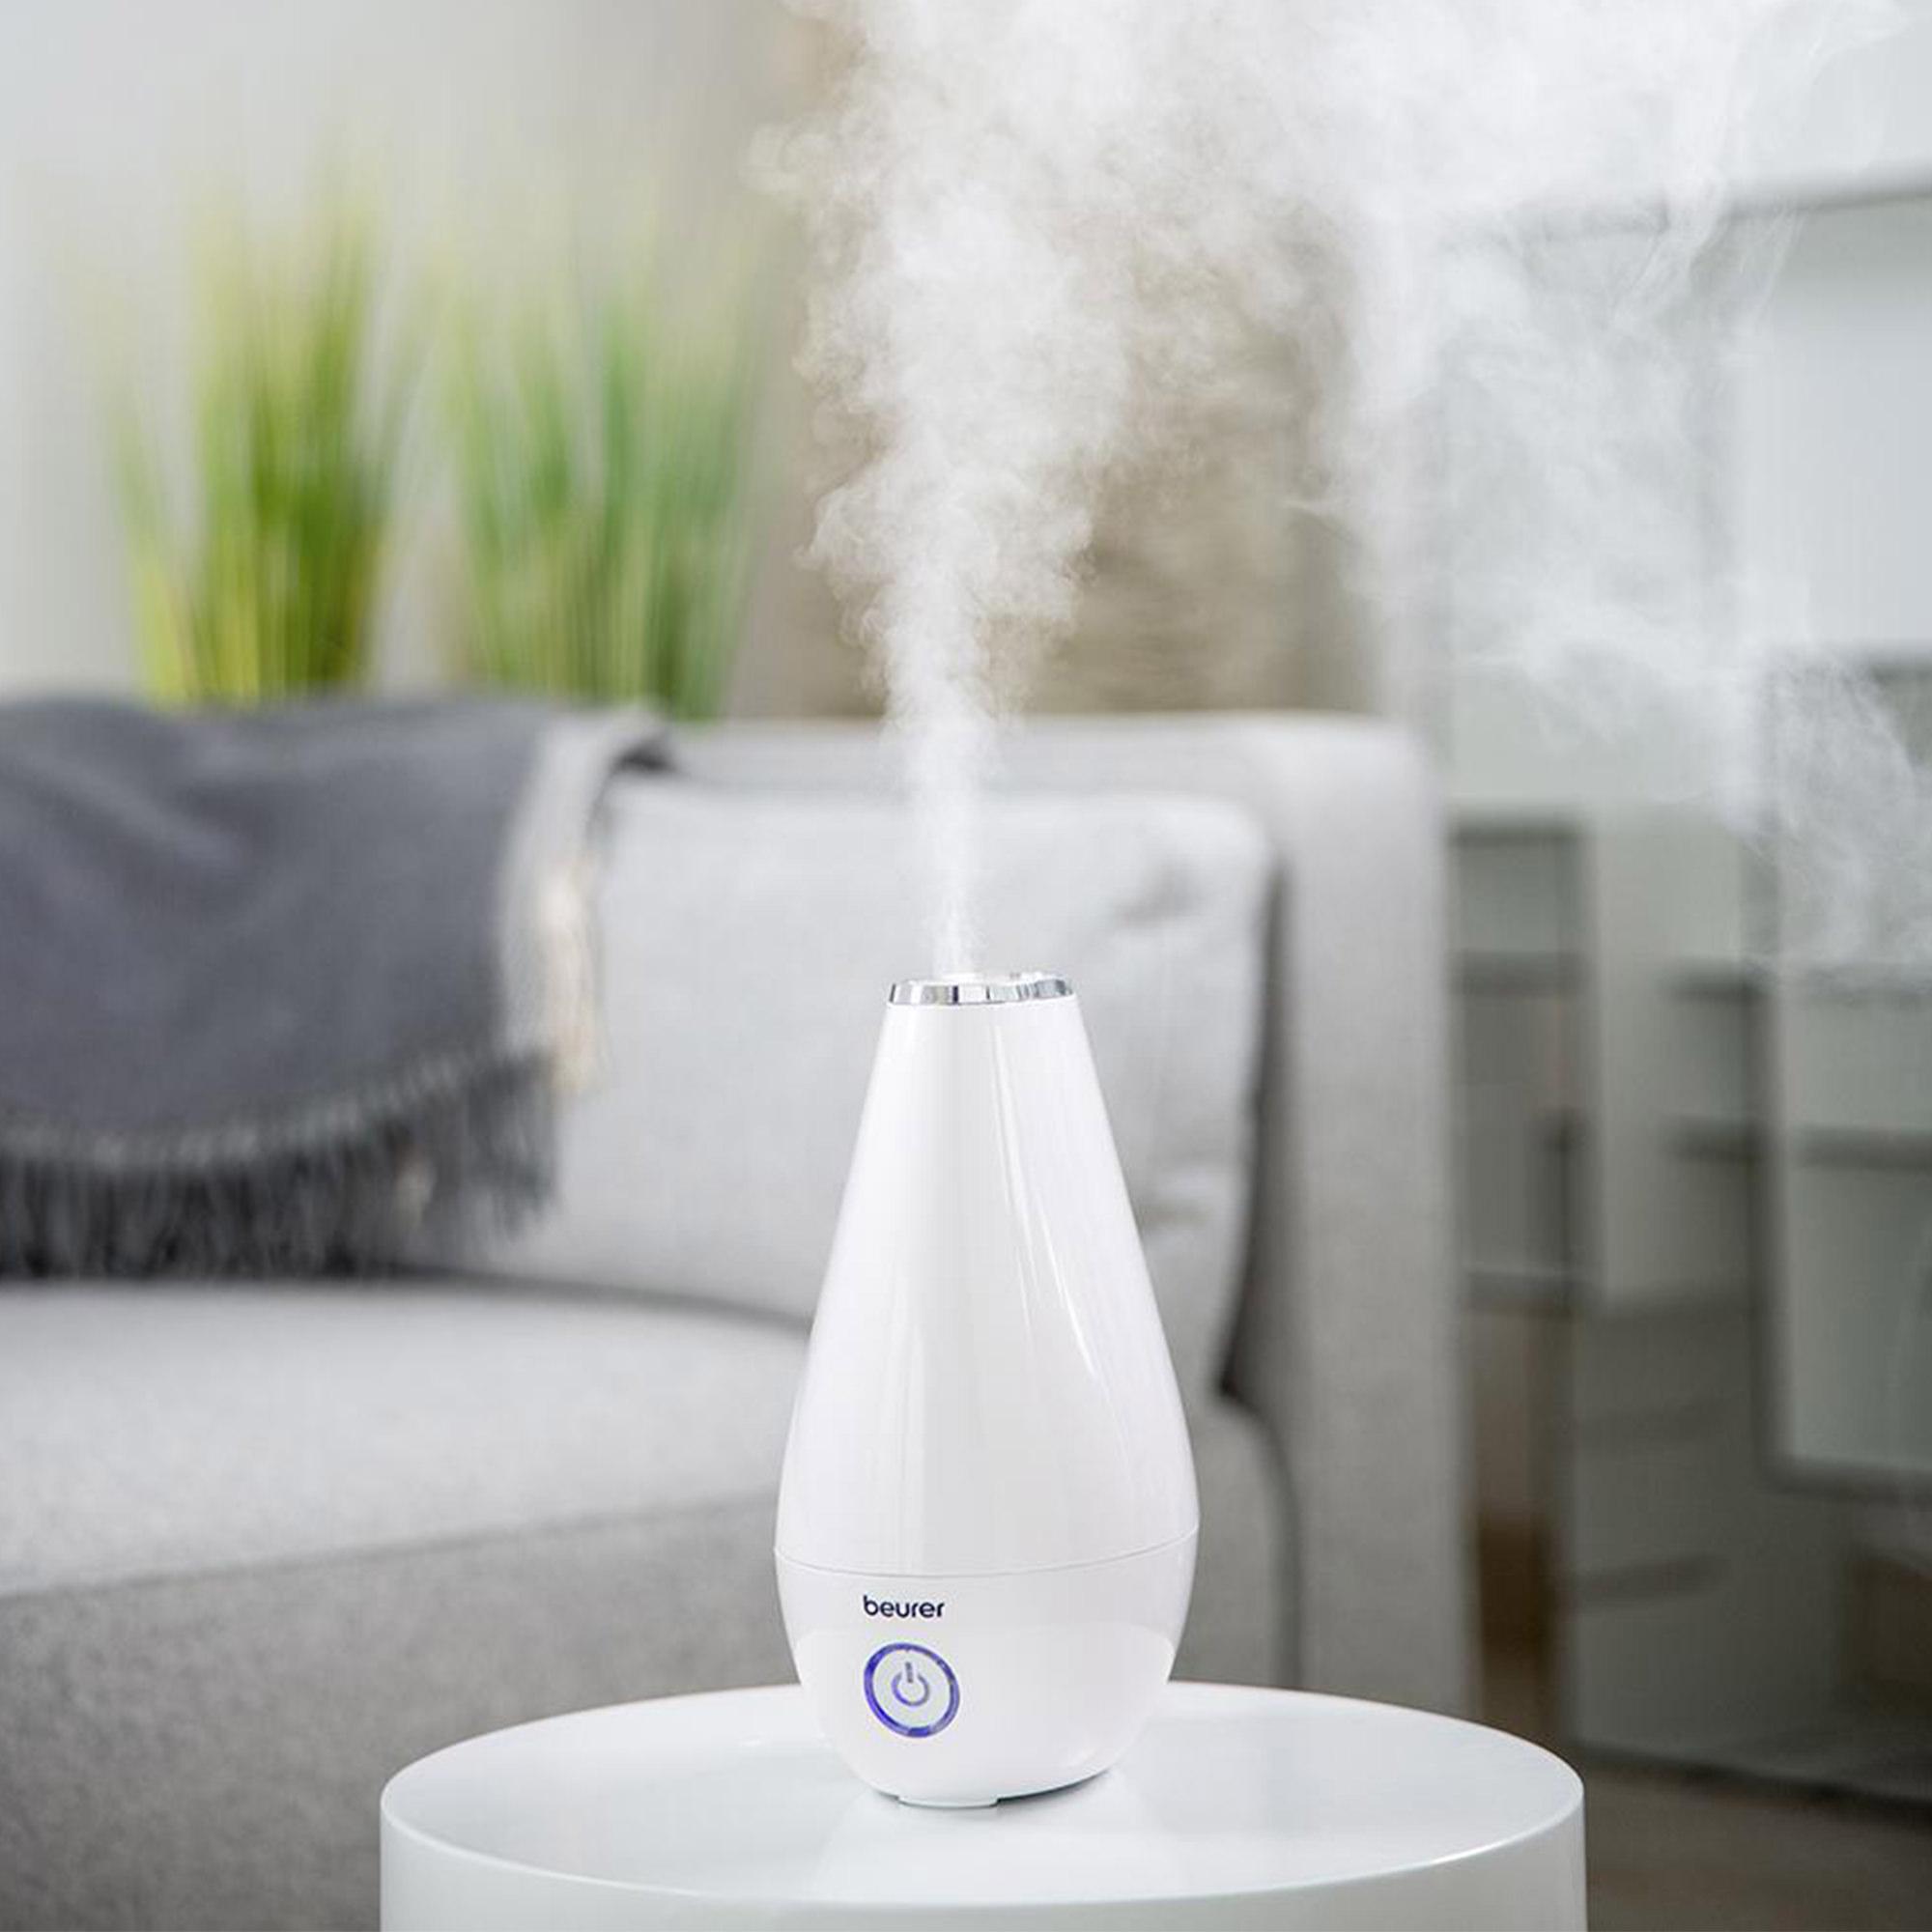 Beurer LB37 Aroma Diffuser and Air Humidifier CADR 20m2/h Image 3